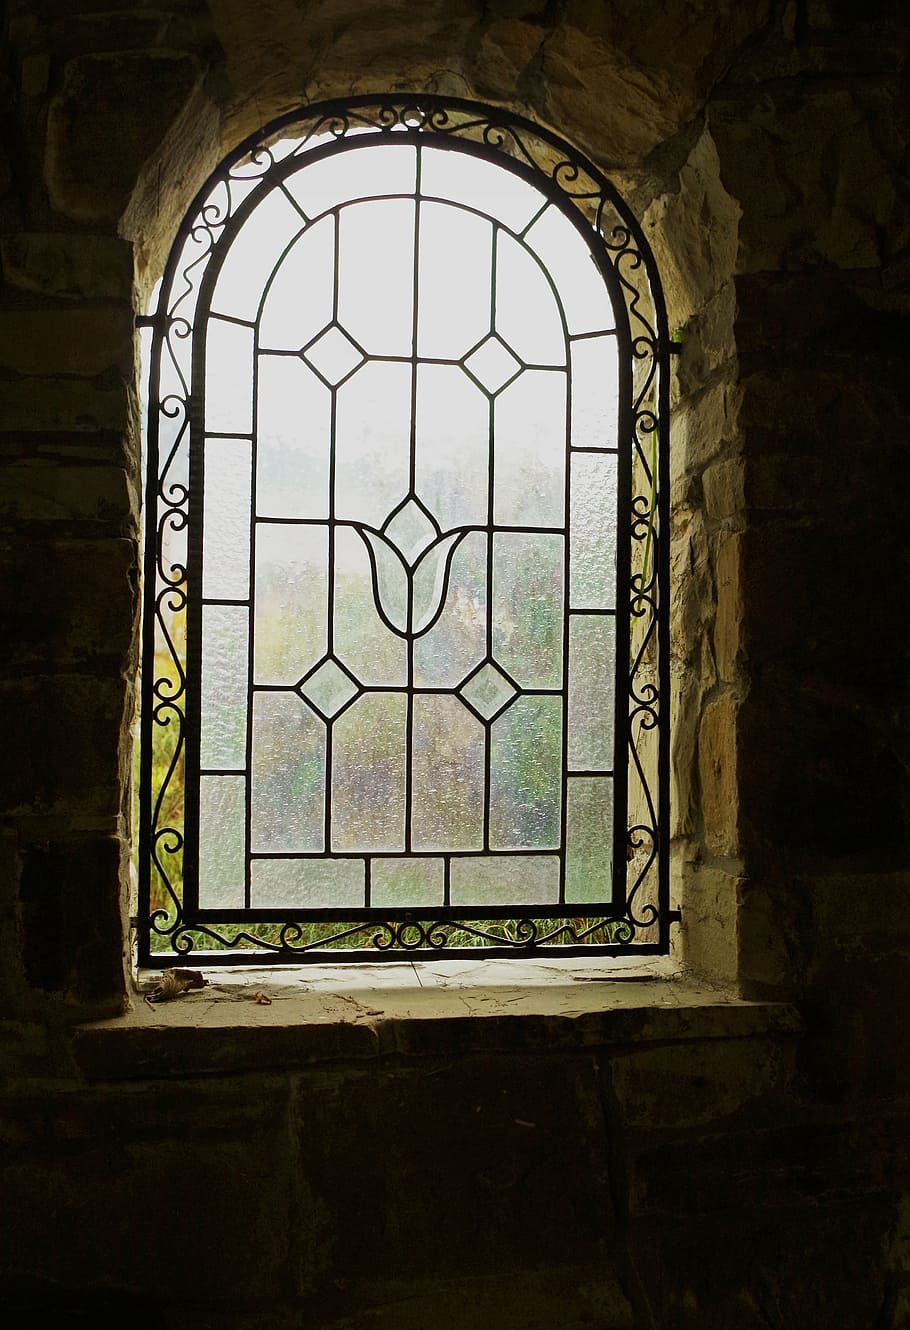 window, stained glass window, pane, monument, lighting, sacred, architecture, decorating, glass, built structure